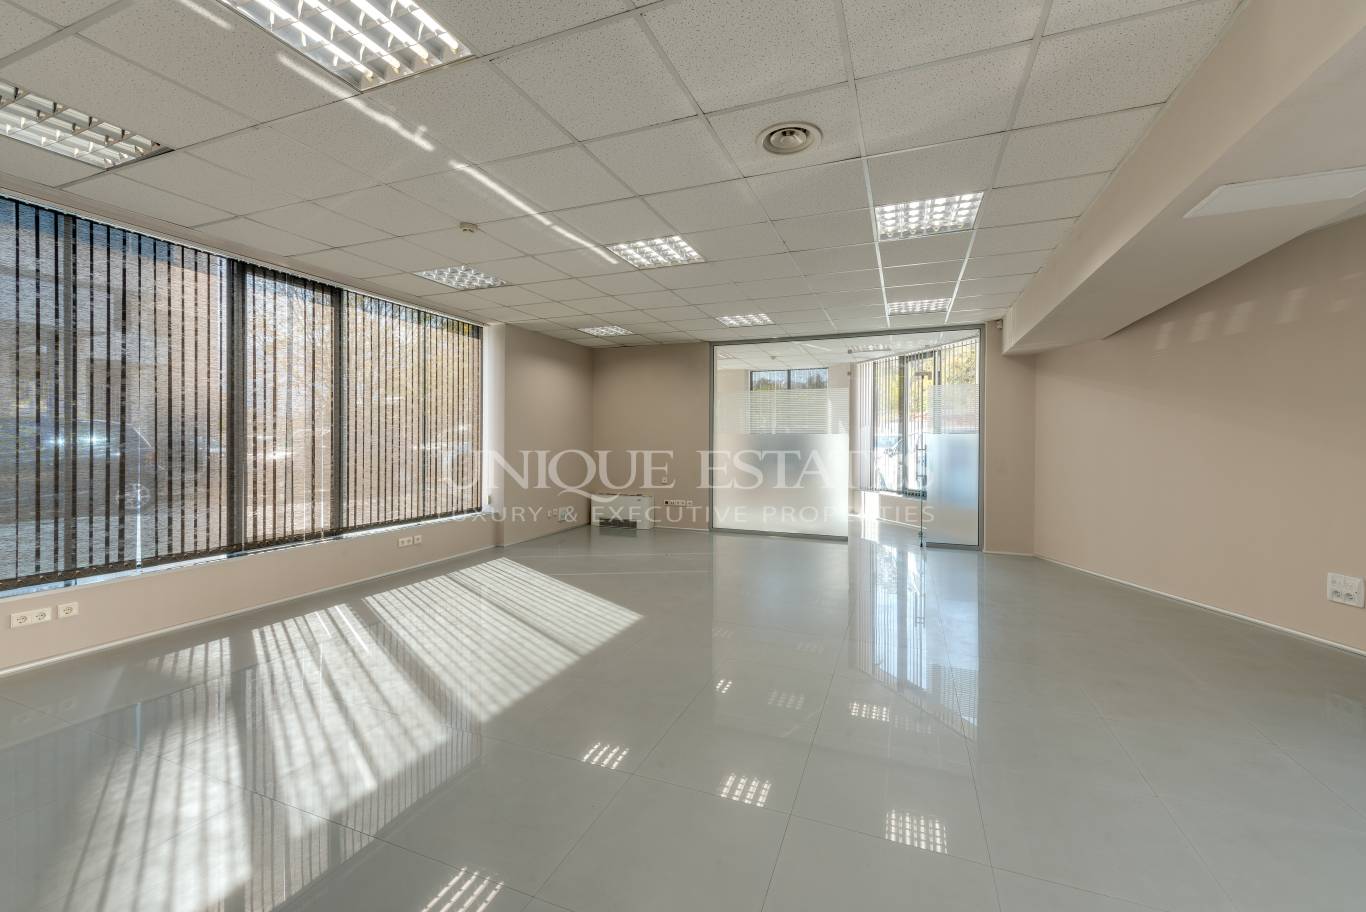 Office Building / Building for sale in Sofia, Downtown with listing ID: K10366 - image 3